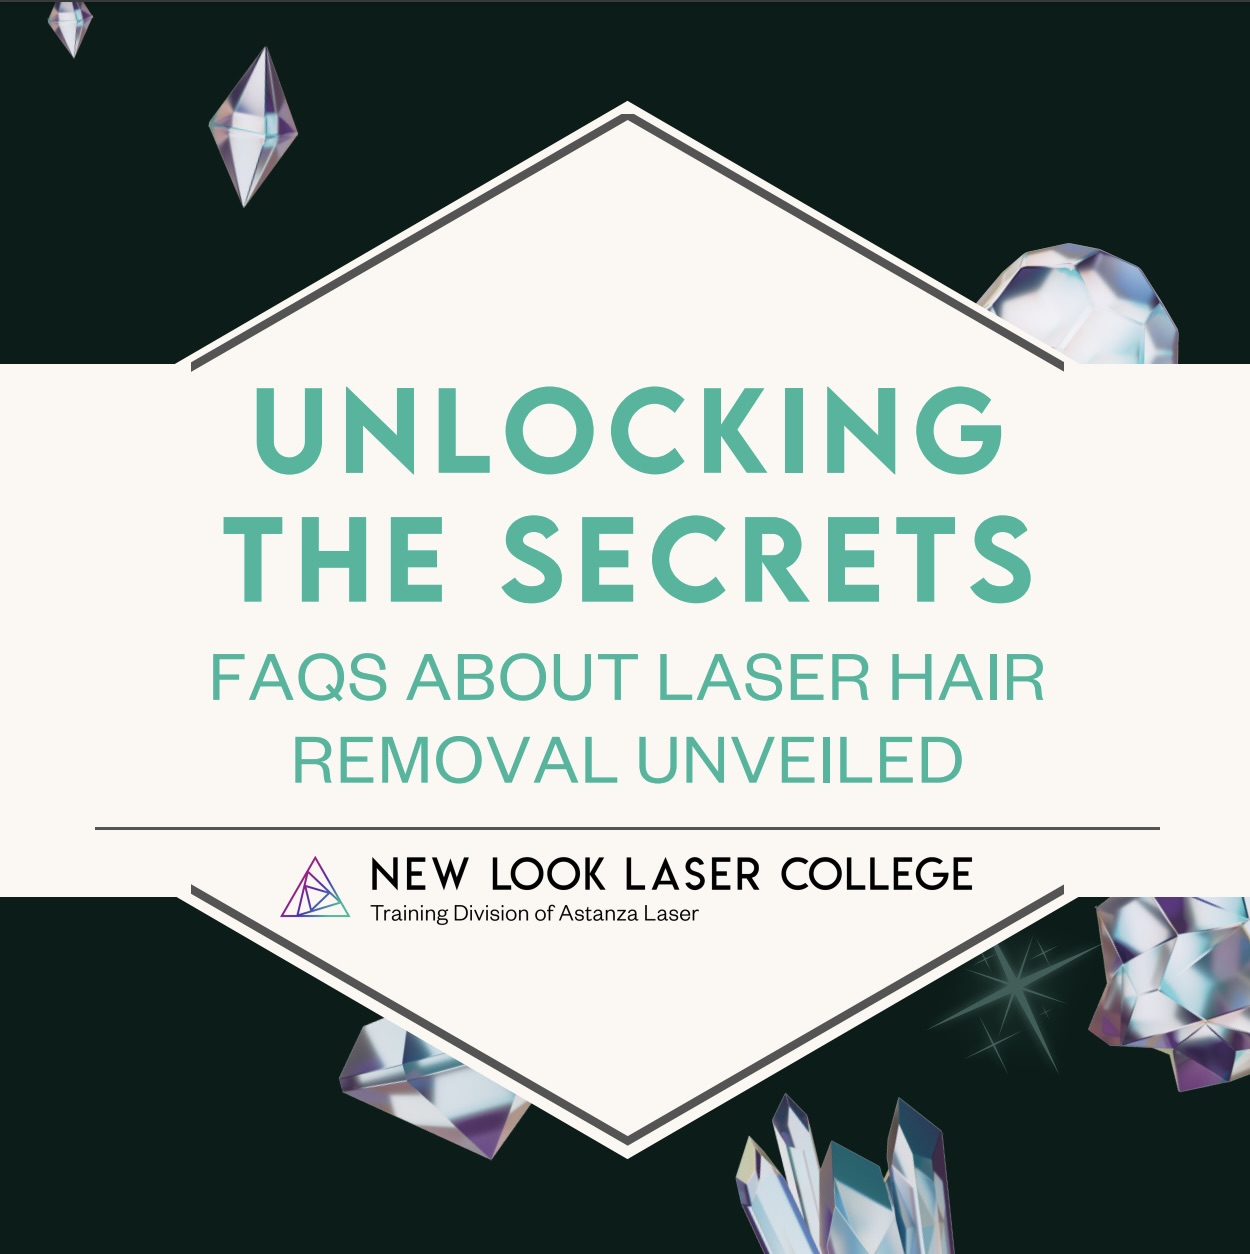 Unlocking-the-Secrets-FAQs-about-Laser-Hair-Removal-Unveiled-SQUARE